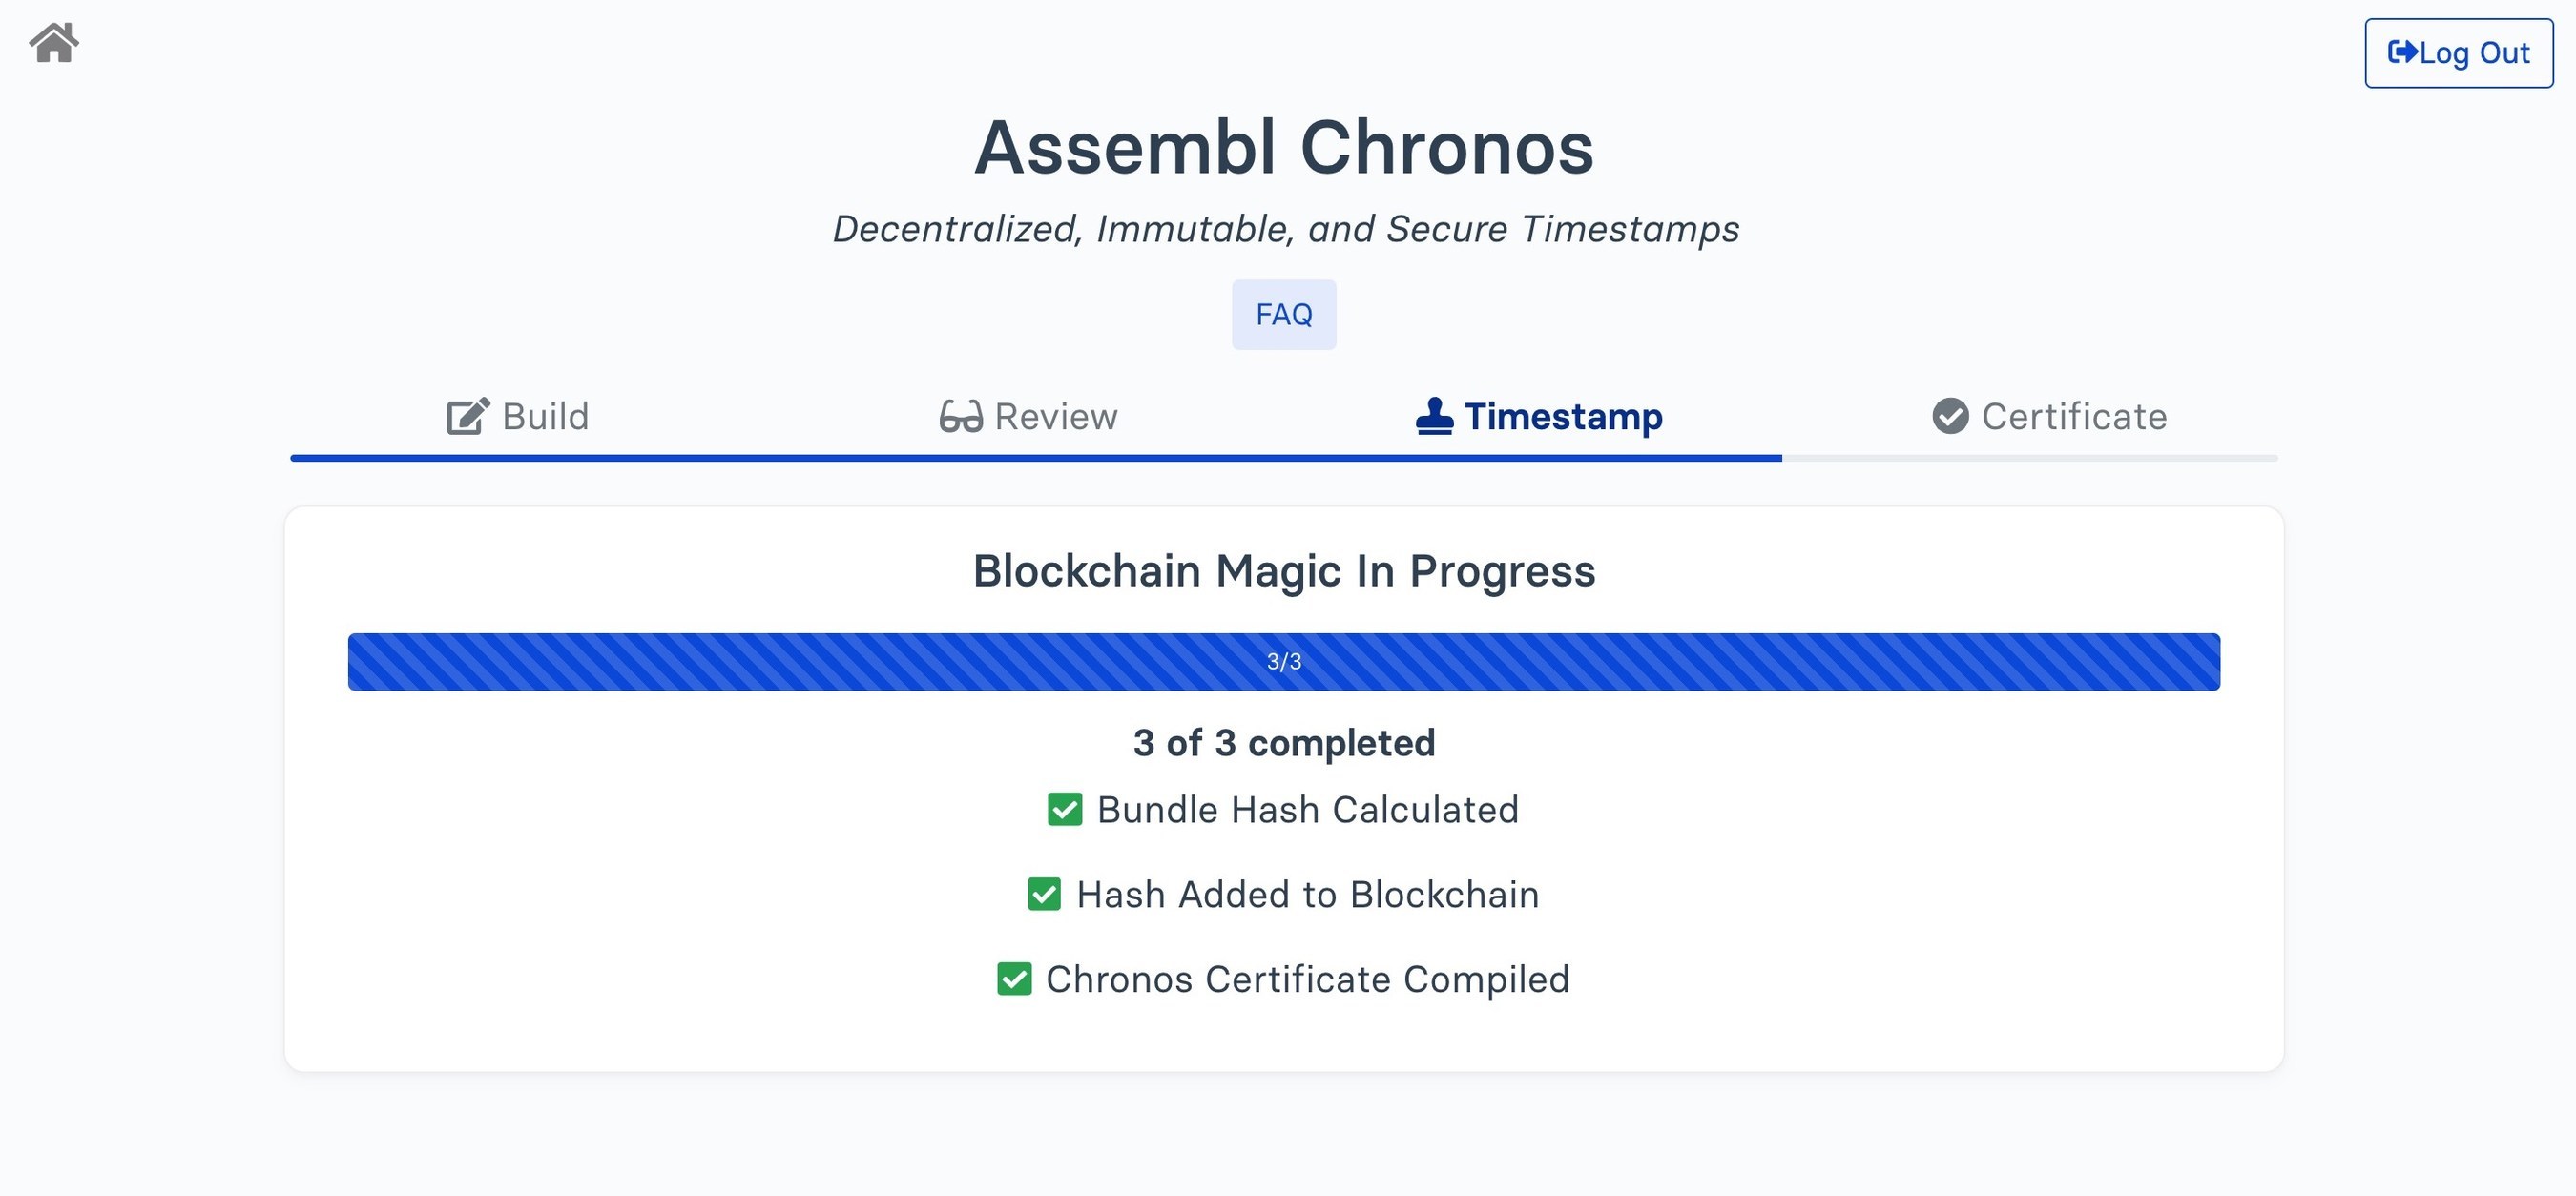 Assembl Chronos (assembl.app/chronos) in action. After building a timestamp (consisting of a title, a document description, and relevant files) the user submits a fingerprint of this data to the Stellar blockchain. In this screenshot, the app is in the process of writing this fingerprint (a SHA256 hash) to the blockchain. Once this timestamp is minted, it will live forever (even if Assembl, the company, ceases to exist).